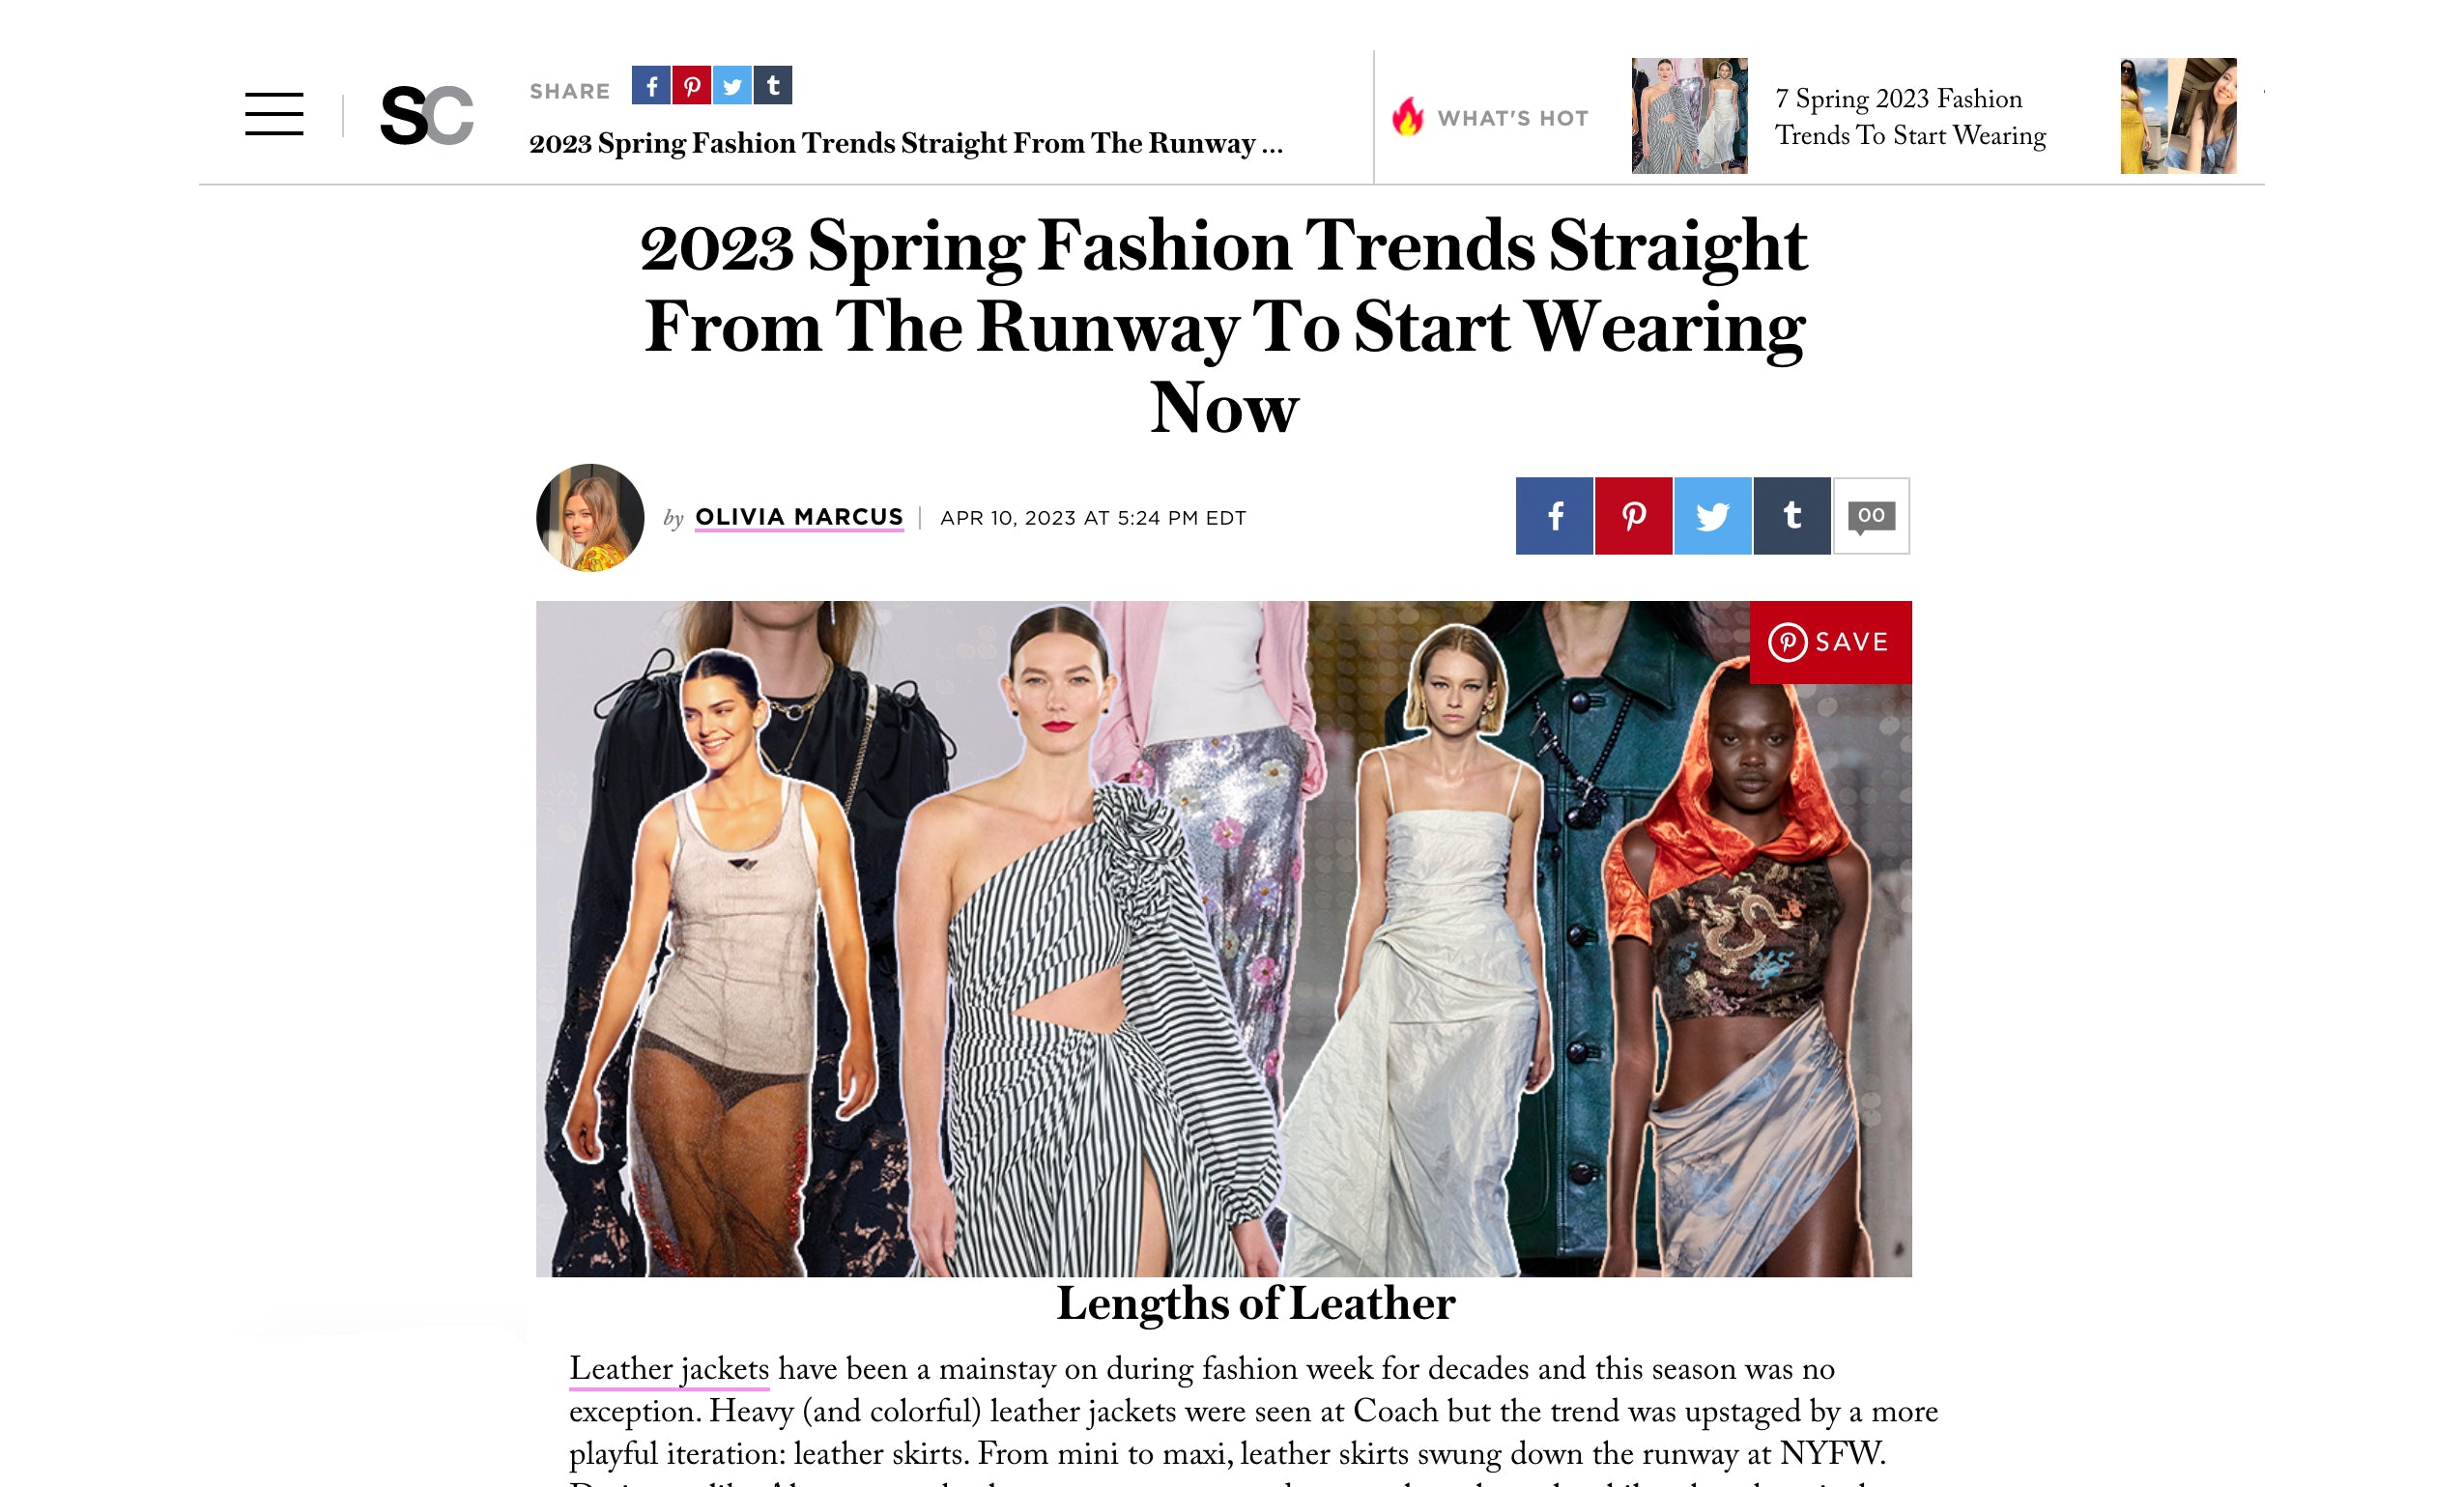 2023 Spring Fashion Trends - LBLC on StyleCaster